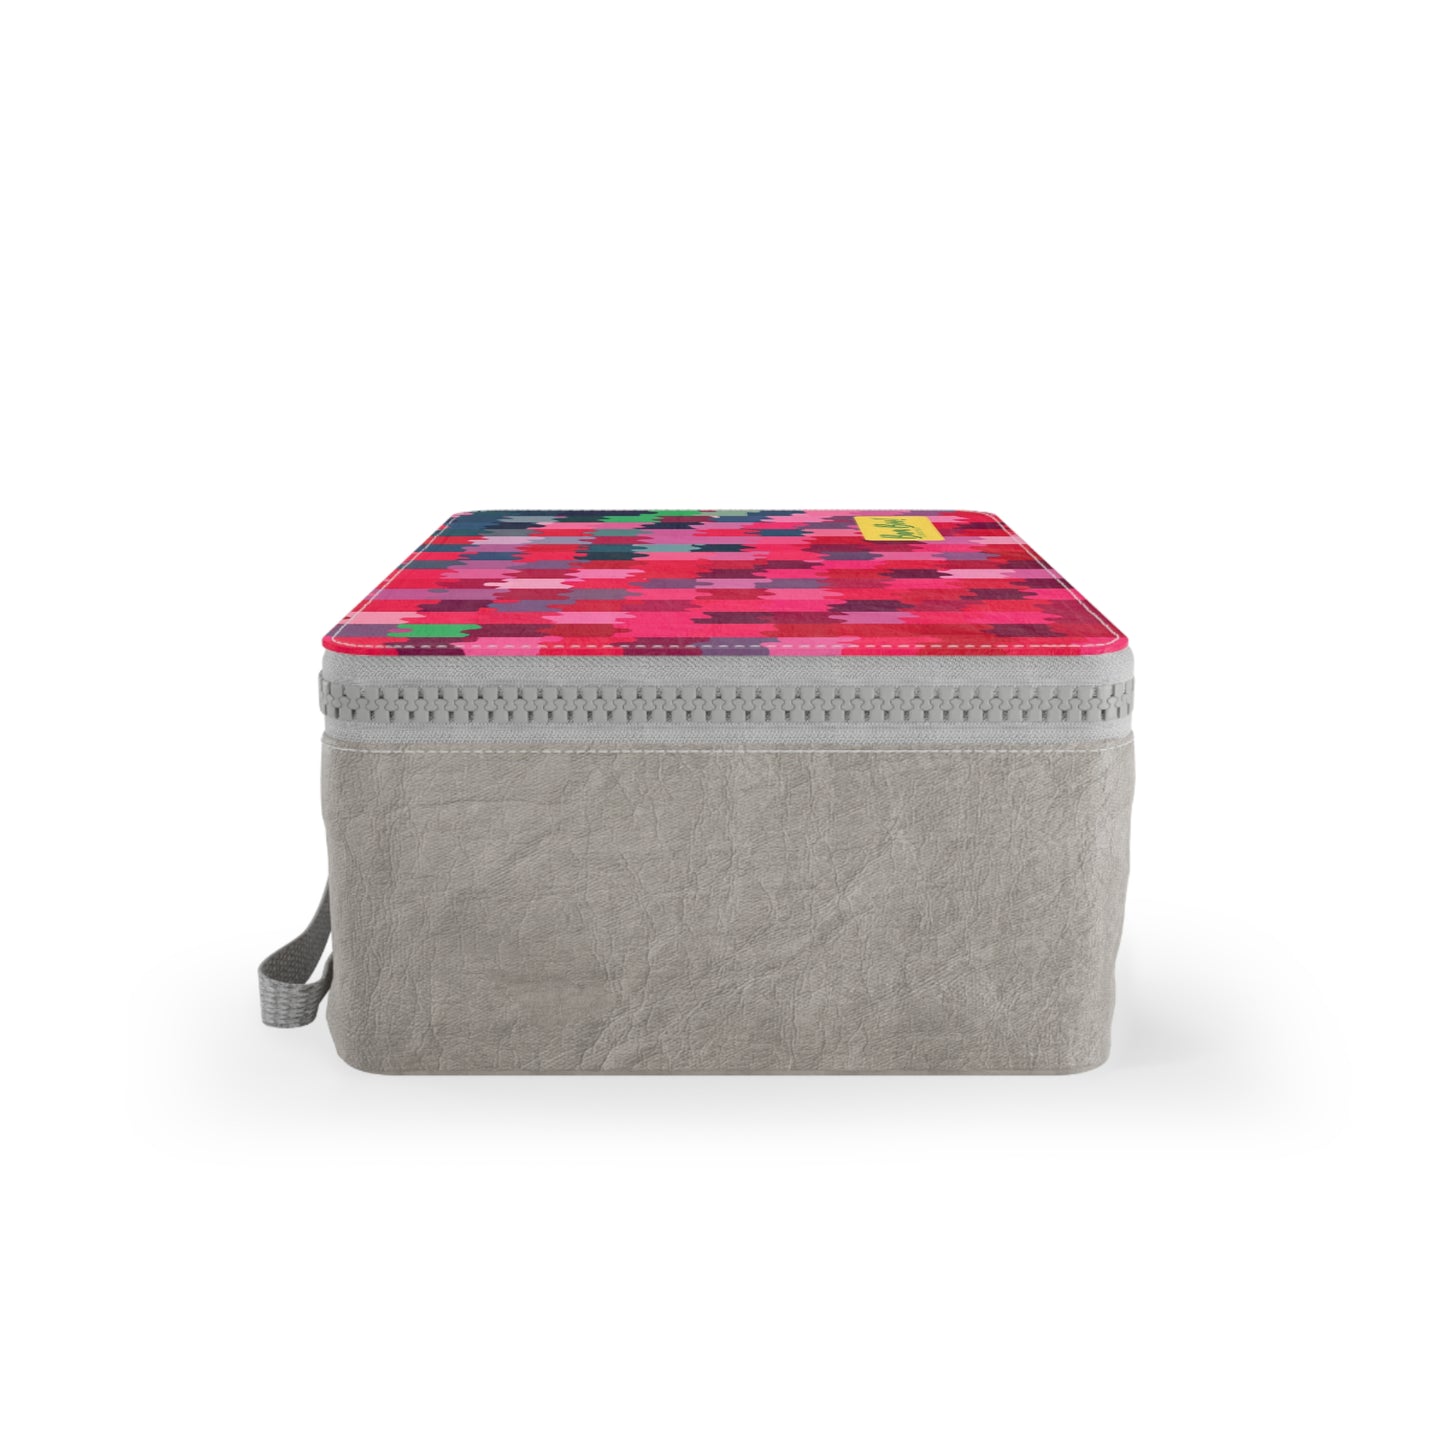 "Pixelated Palettes: Exploring the Colors of Texture" - Bam Boo! Lifestyle Eco-friendly Paper Lunch Bag